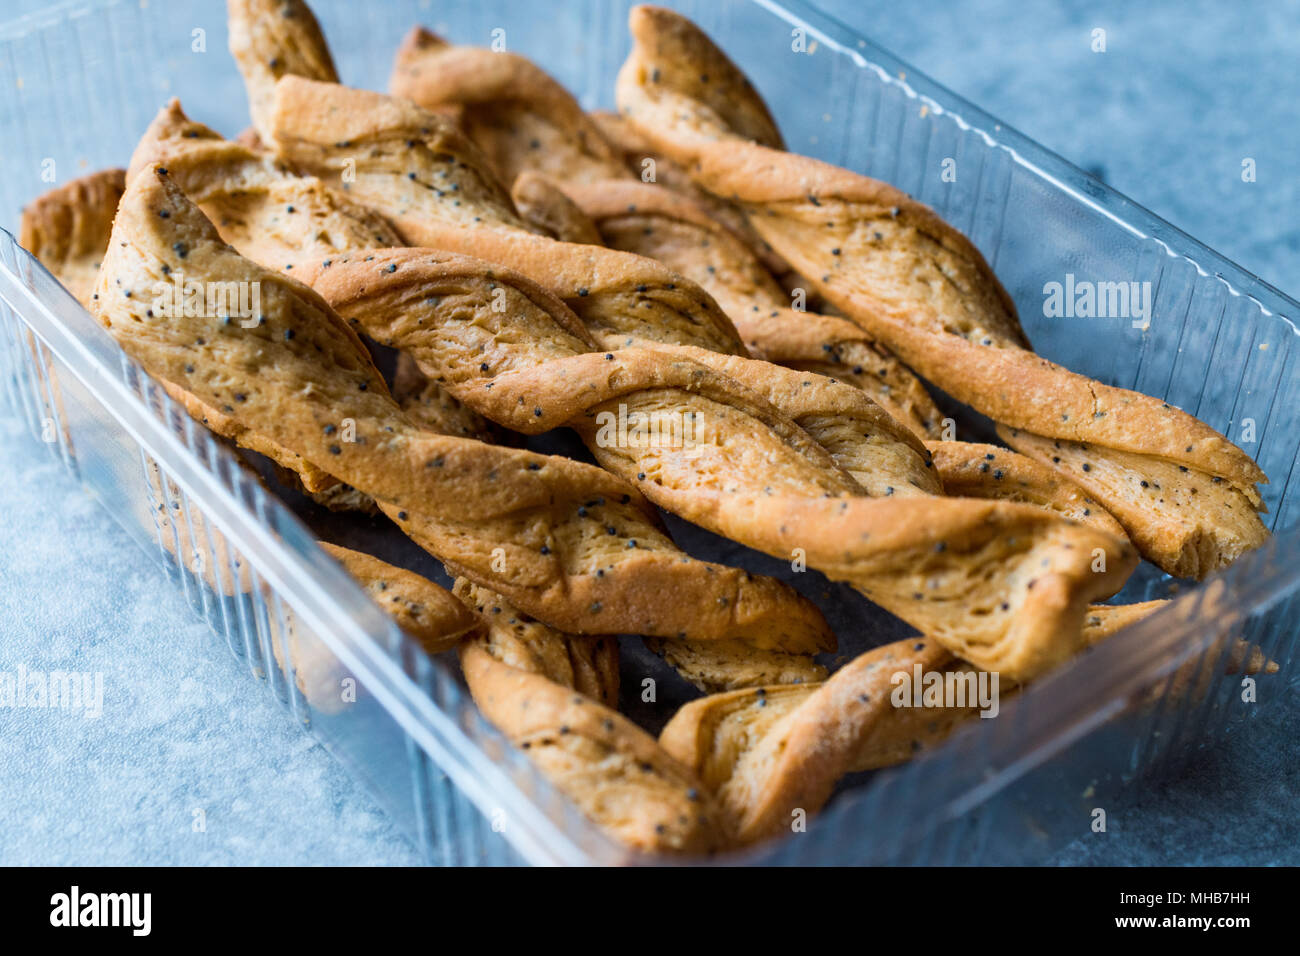 Mille Feuille Twisted Bread Stick Crackers with Spices, Tomato Flavor and Black Sesame or Cumins. Organic Food. Stock Photo